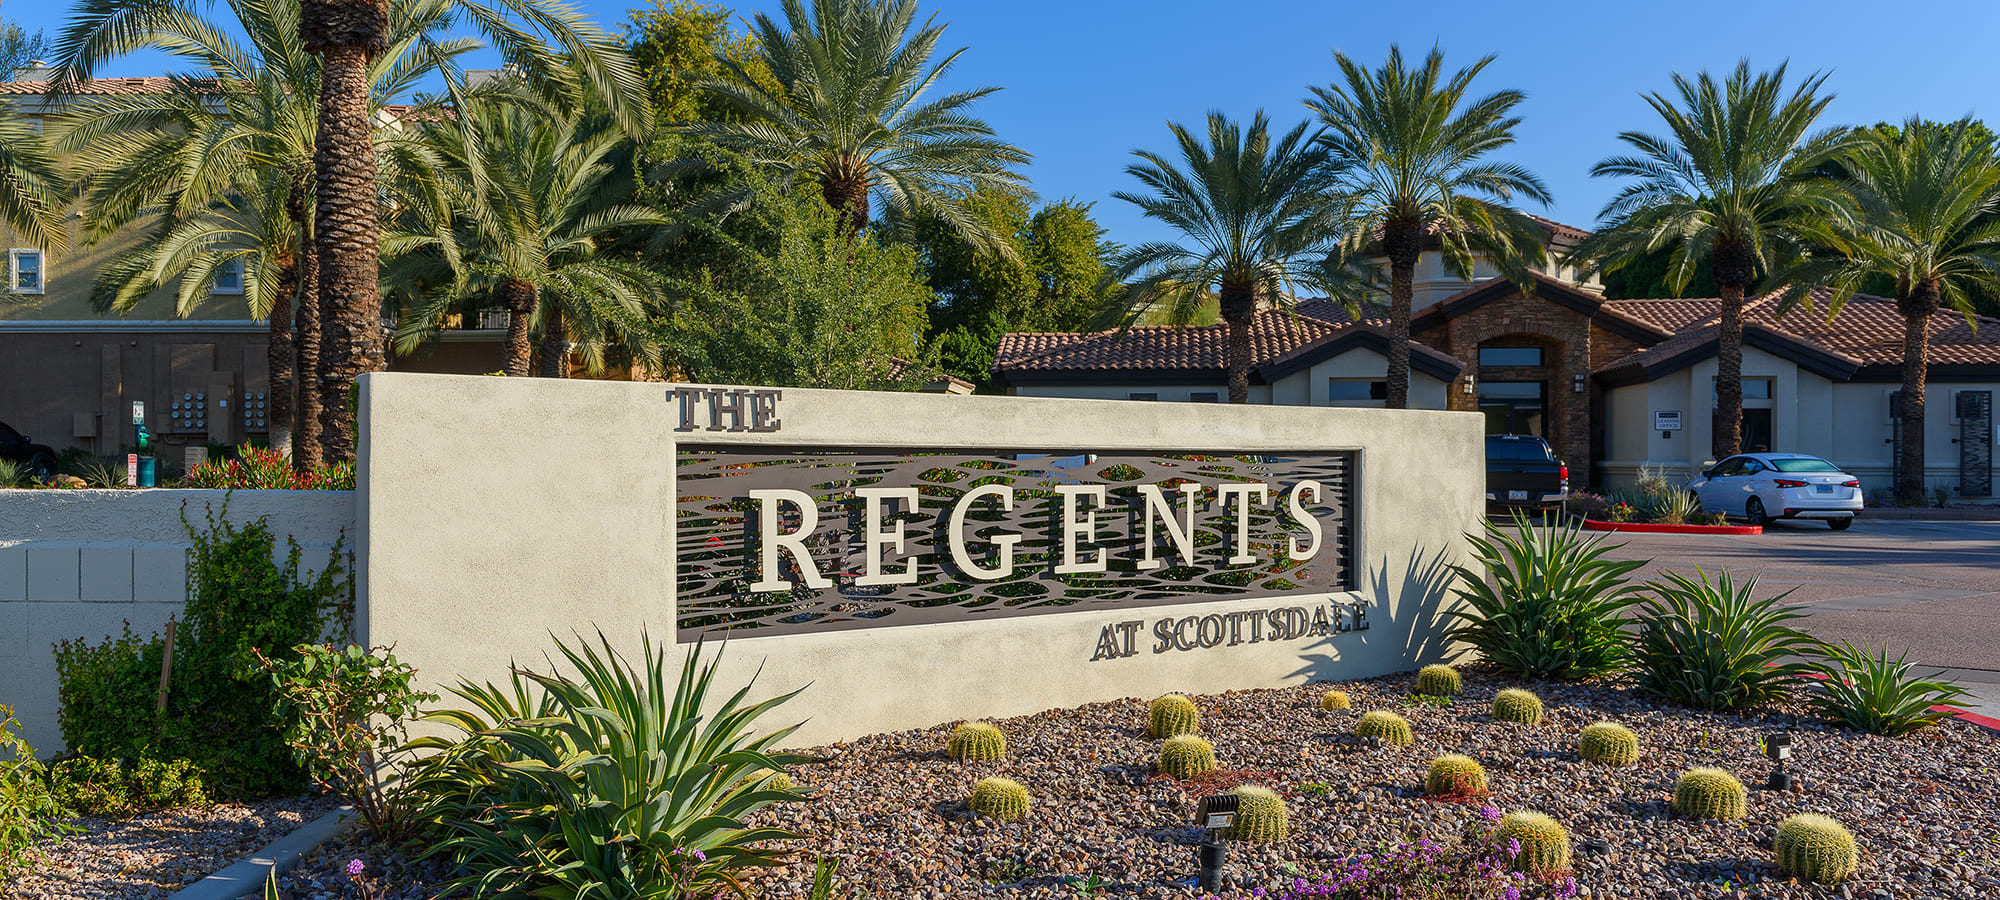 Monument sign at The Regents at Scottsdale in Scottsdale, Arizona